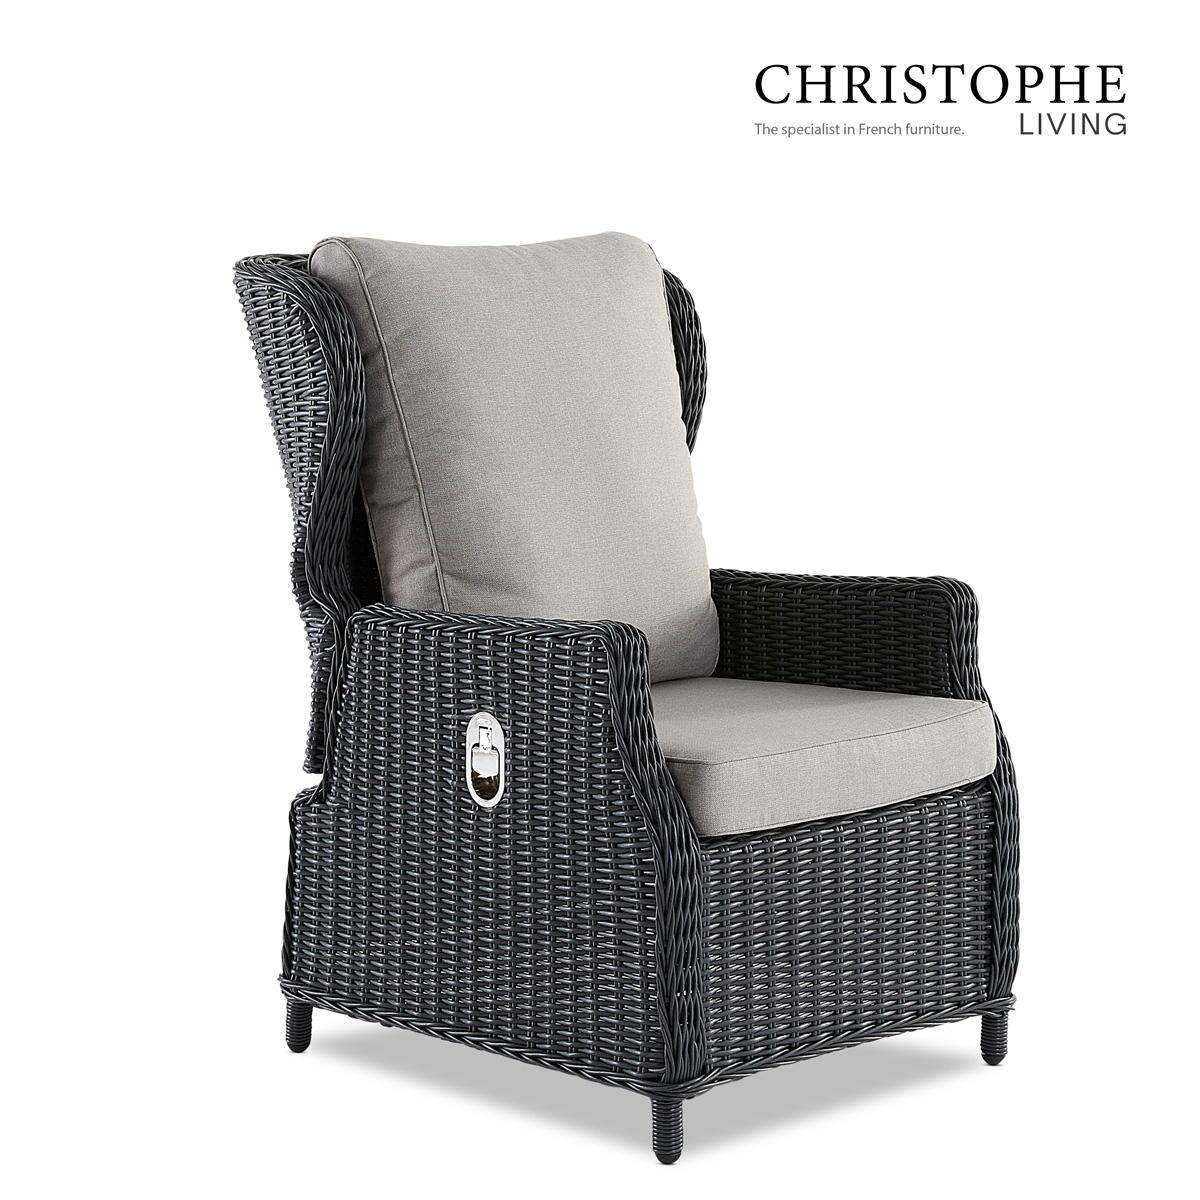 Whitehaven Luxury Wicker Reclining Chair in Anthracite with Aluminum Frame and Water-Resistant Fabric